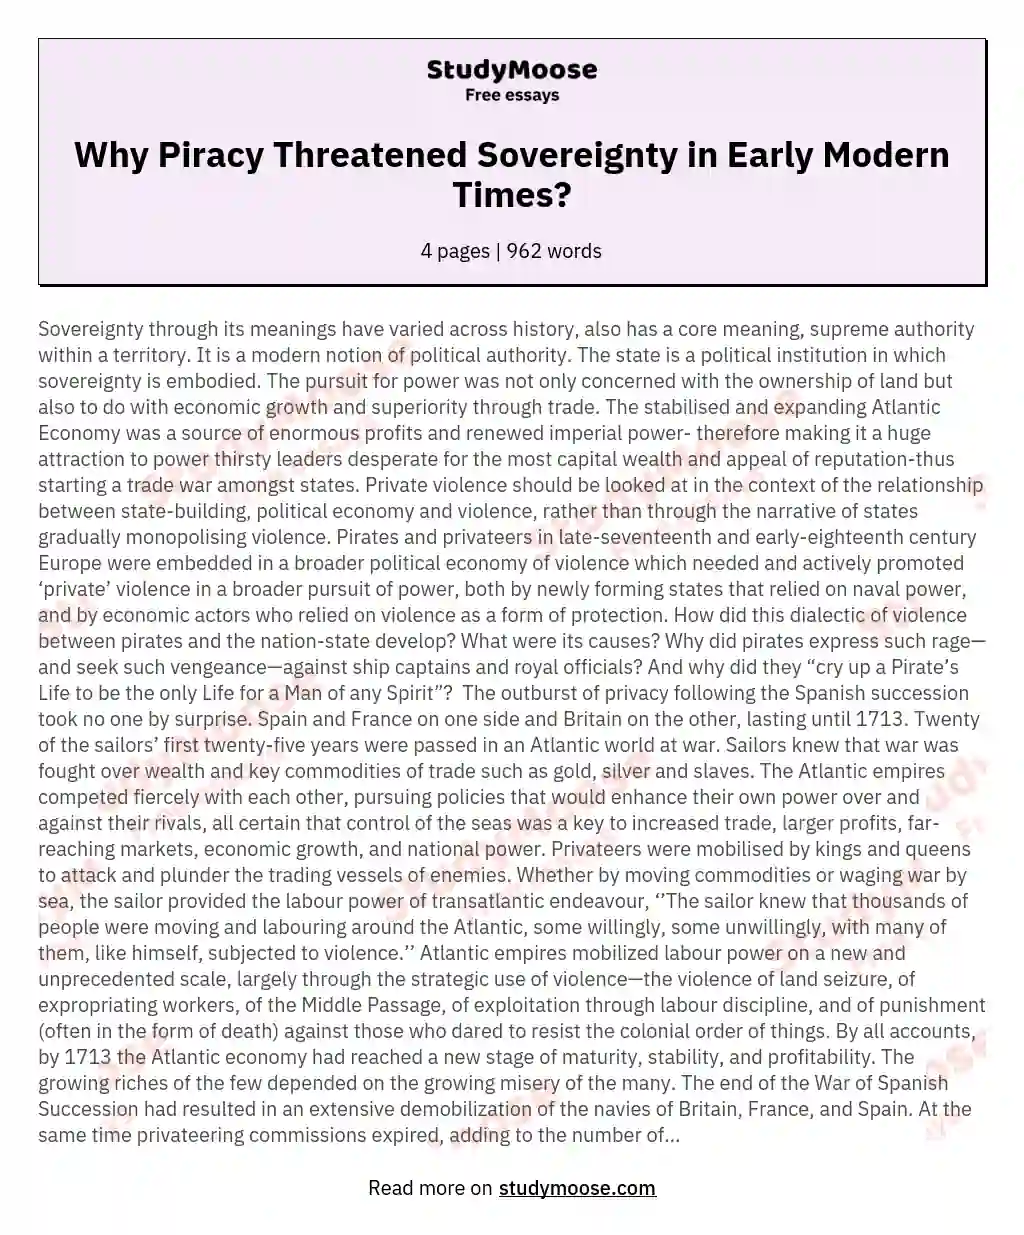 Why Piracy Threatened Sovereignty in Early Modern Times? essay